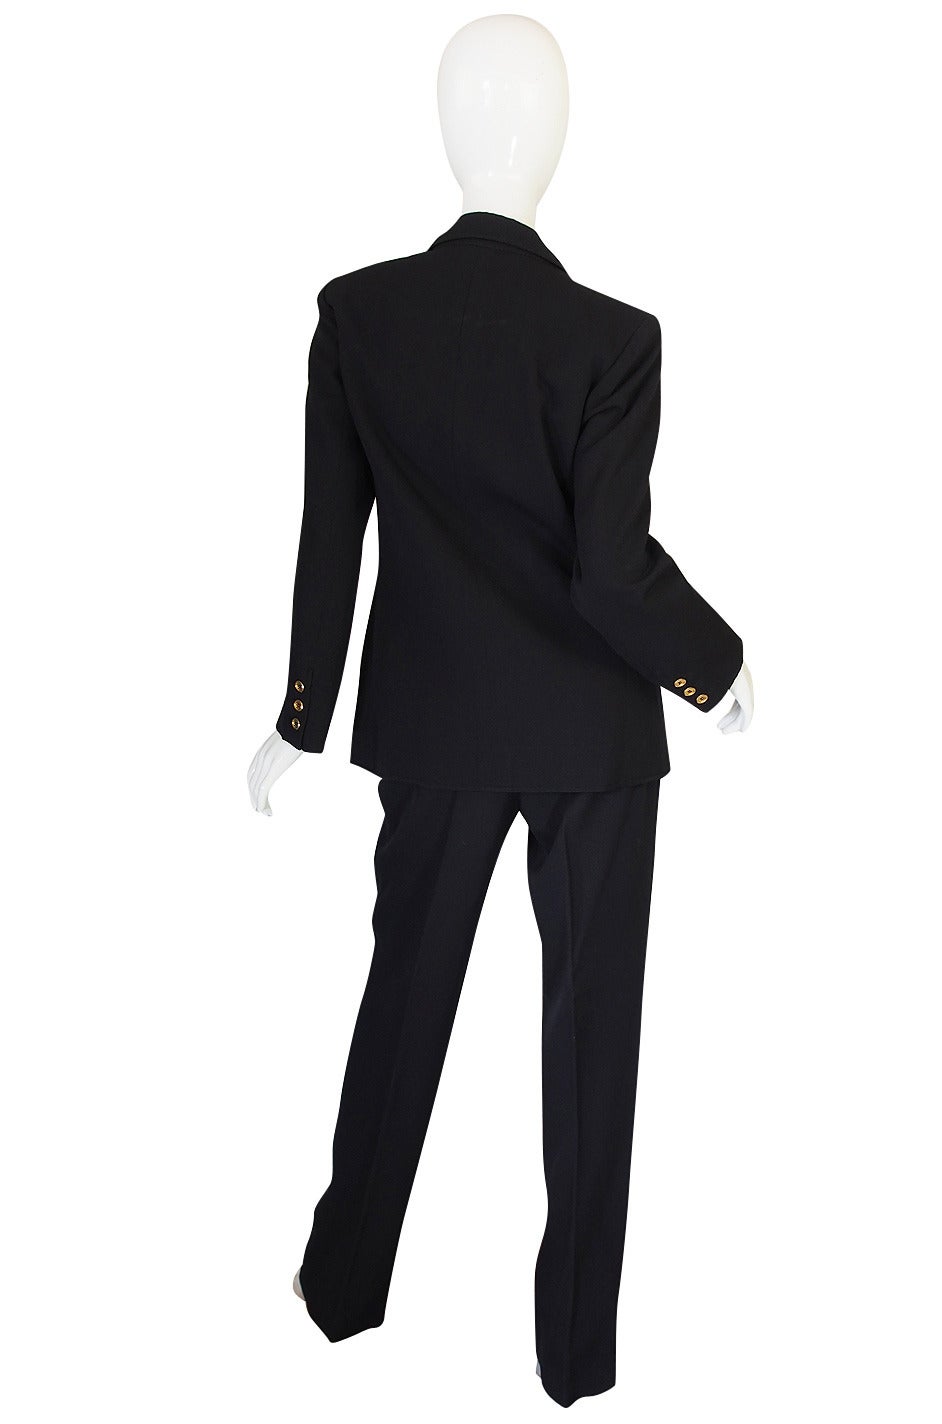 This suit bears one of the early Saint Laurent Rive gauche labels and also has a hand written tag ion the pants - most likely denoting it as a custom order. Something appropriate for those early years of the boutiques opening. It is classic Yves